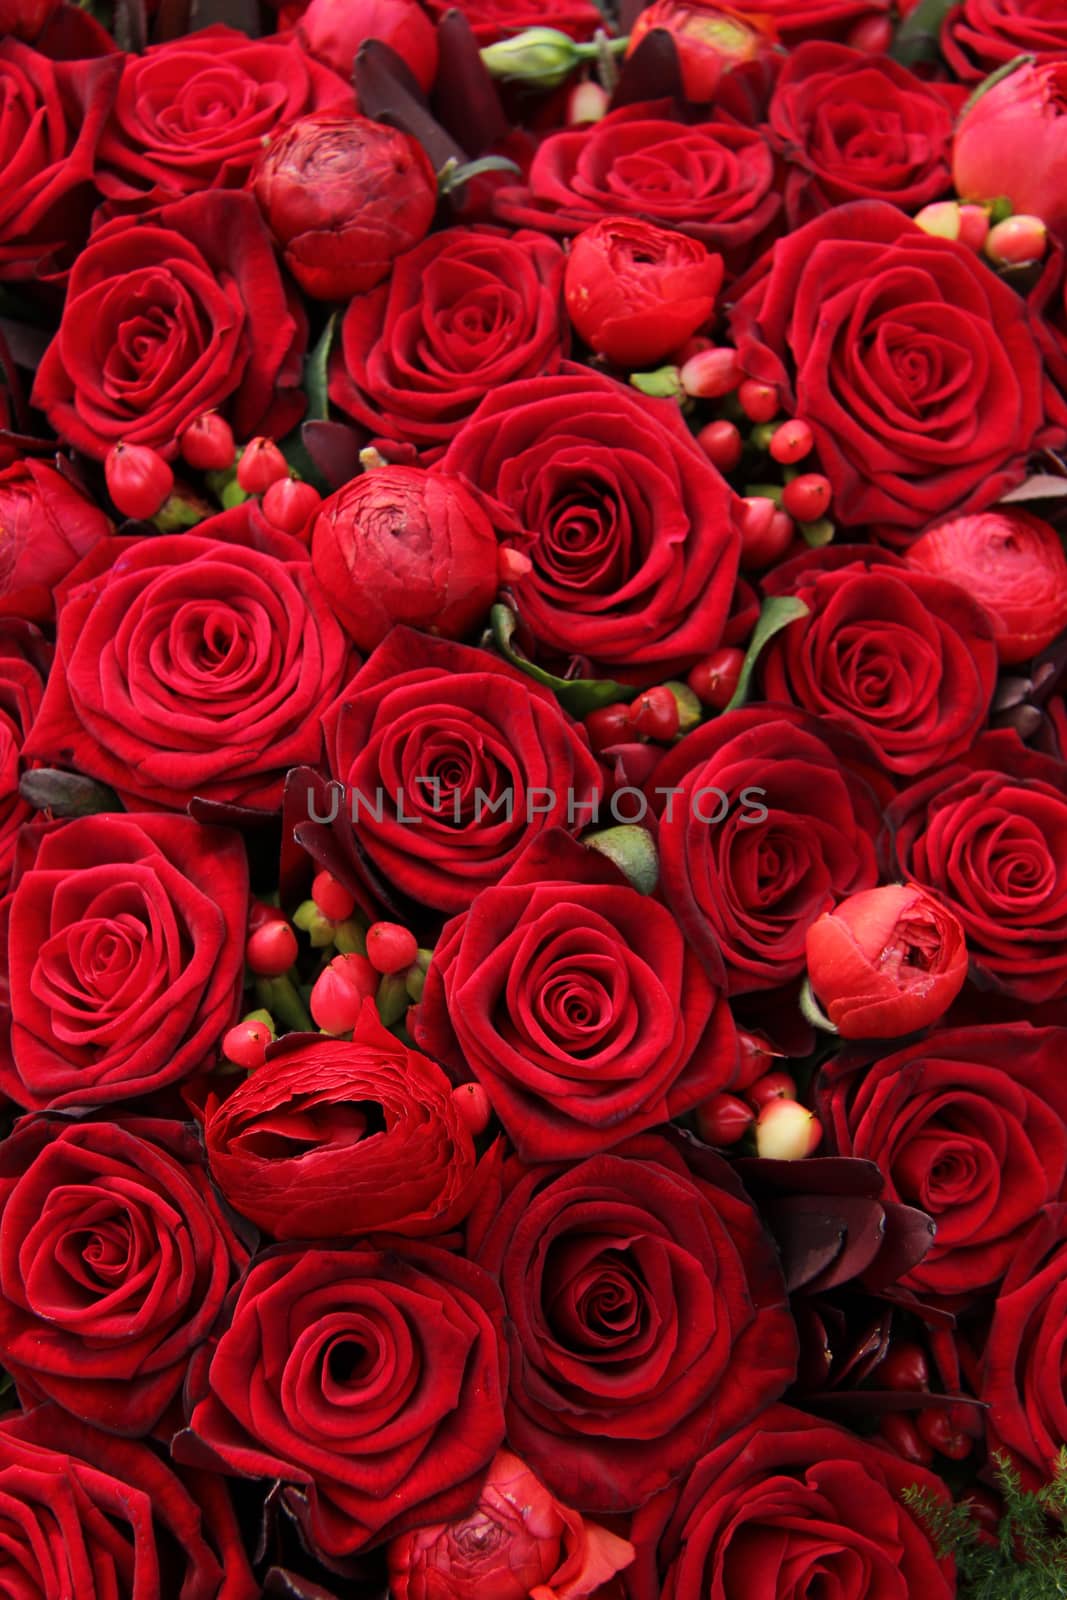 ranunculus, berries and roses in a group by studioportosabbia